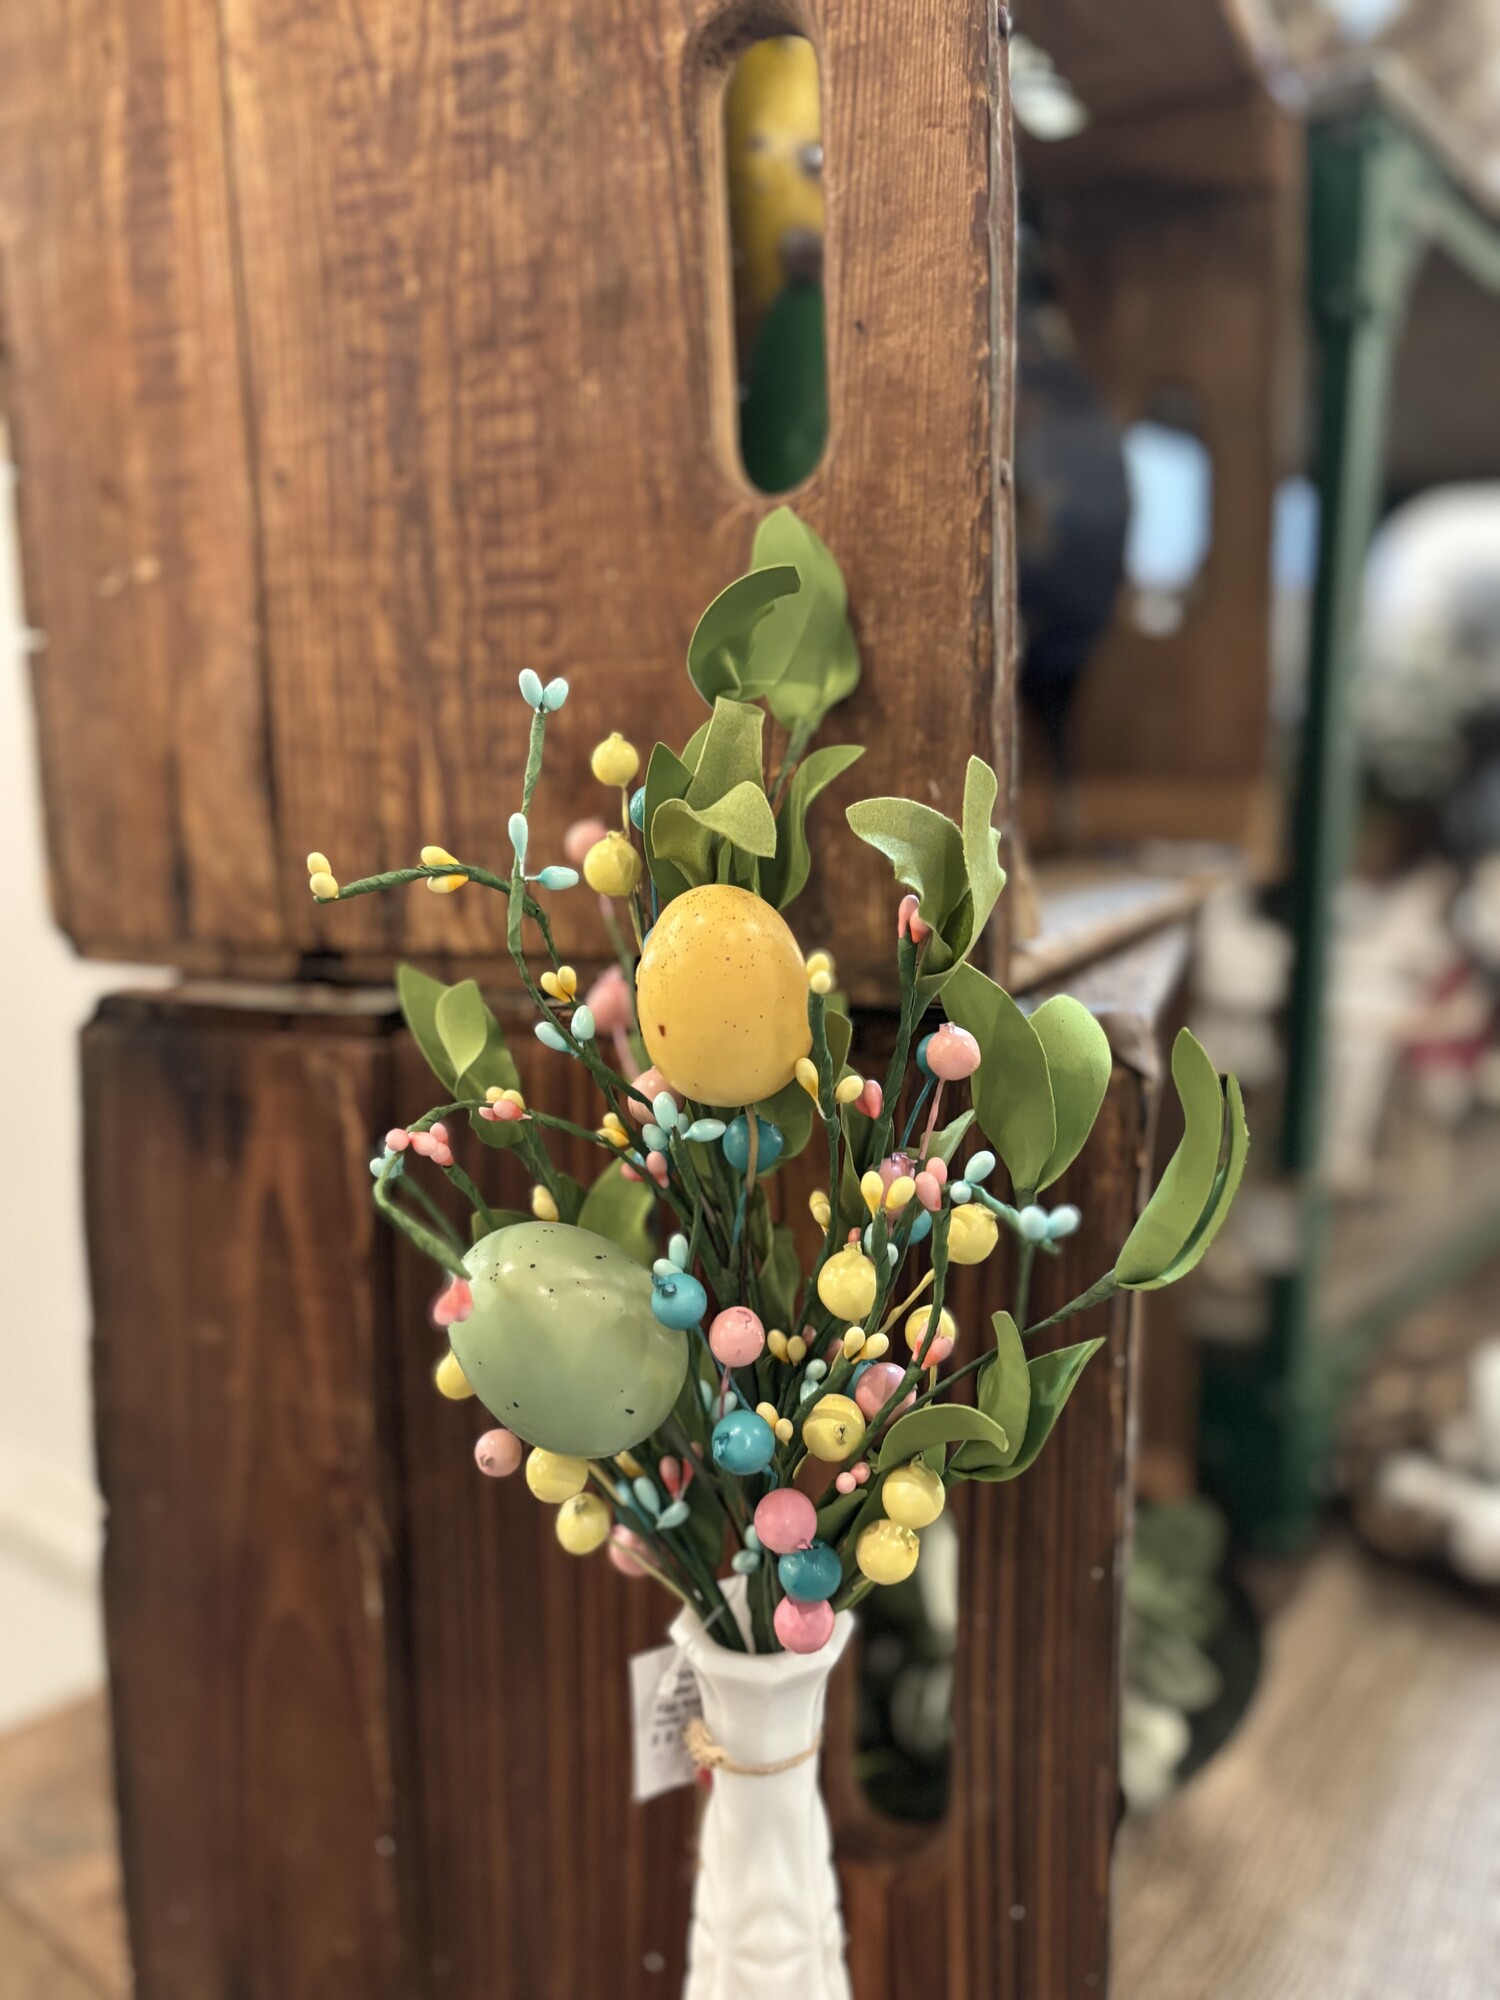 Egg and herb stem features pastel colored eggs, seeds and berries for a bright themed easter finish.  Bush has fabric leaves and paper wrapped branch.
Stem measures 15 inches high